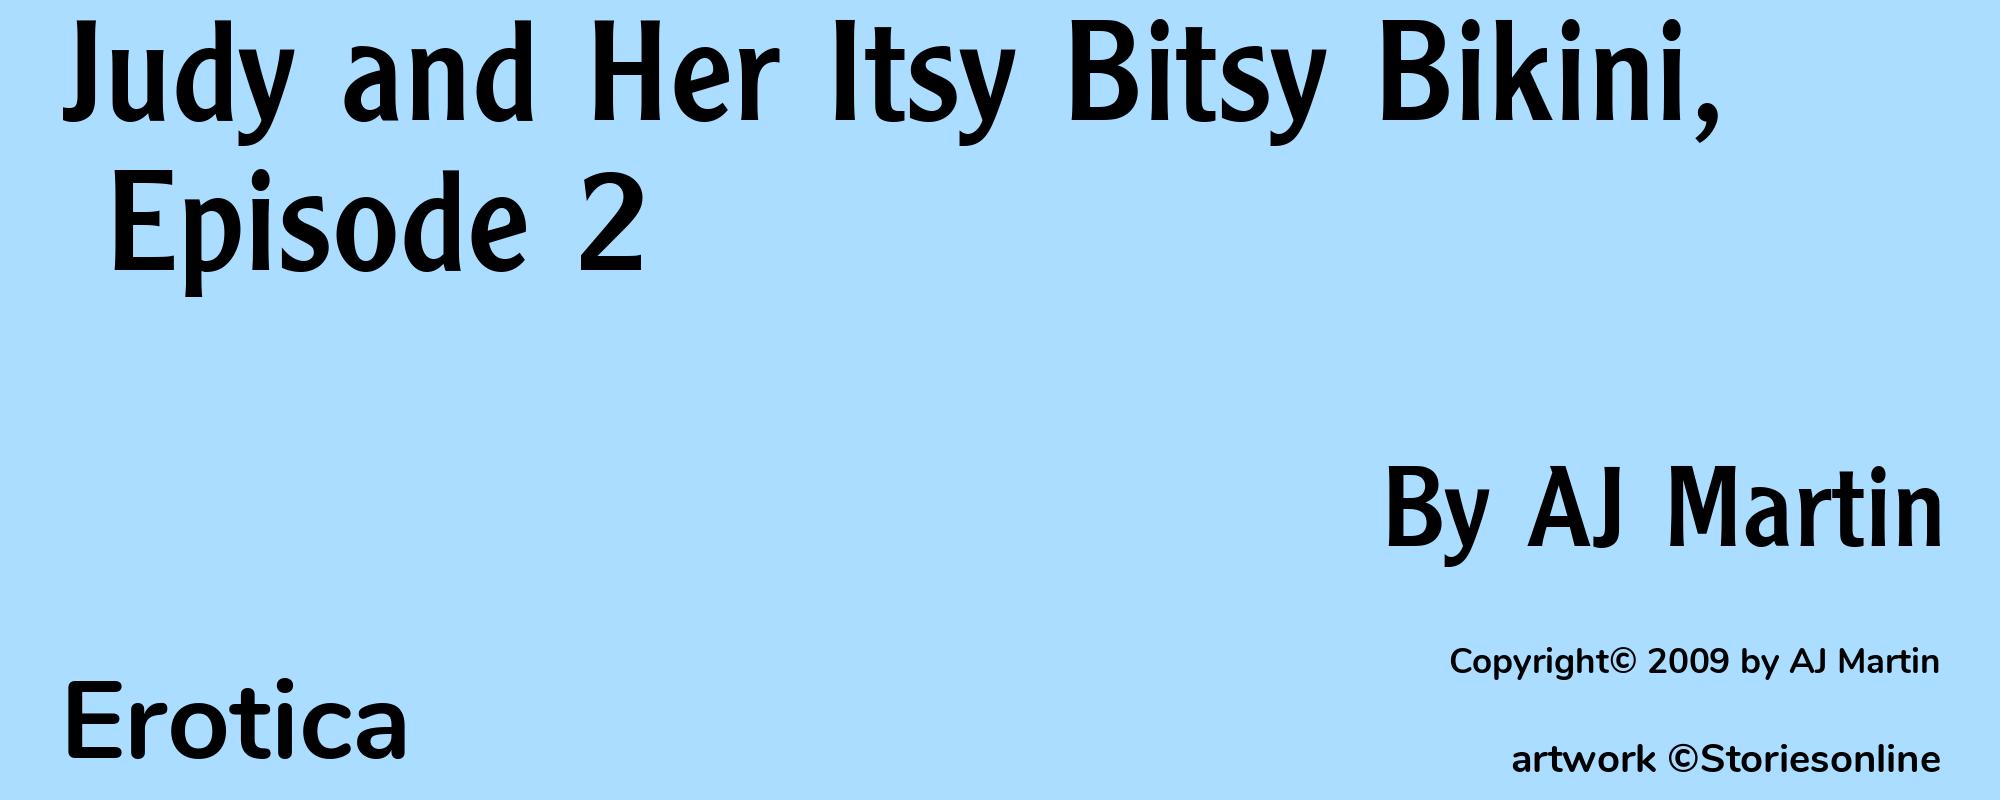 Judy and Her Itsy Bitsy Bikini, Episode 2 - Cover